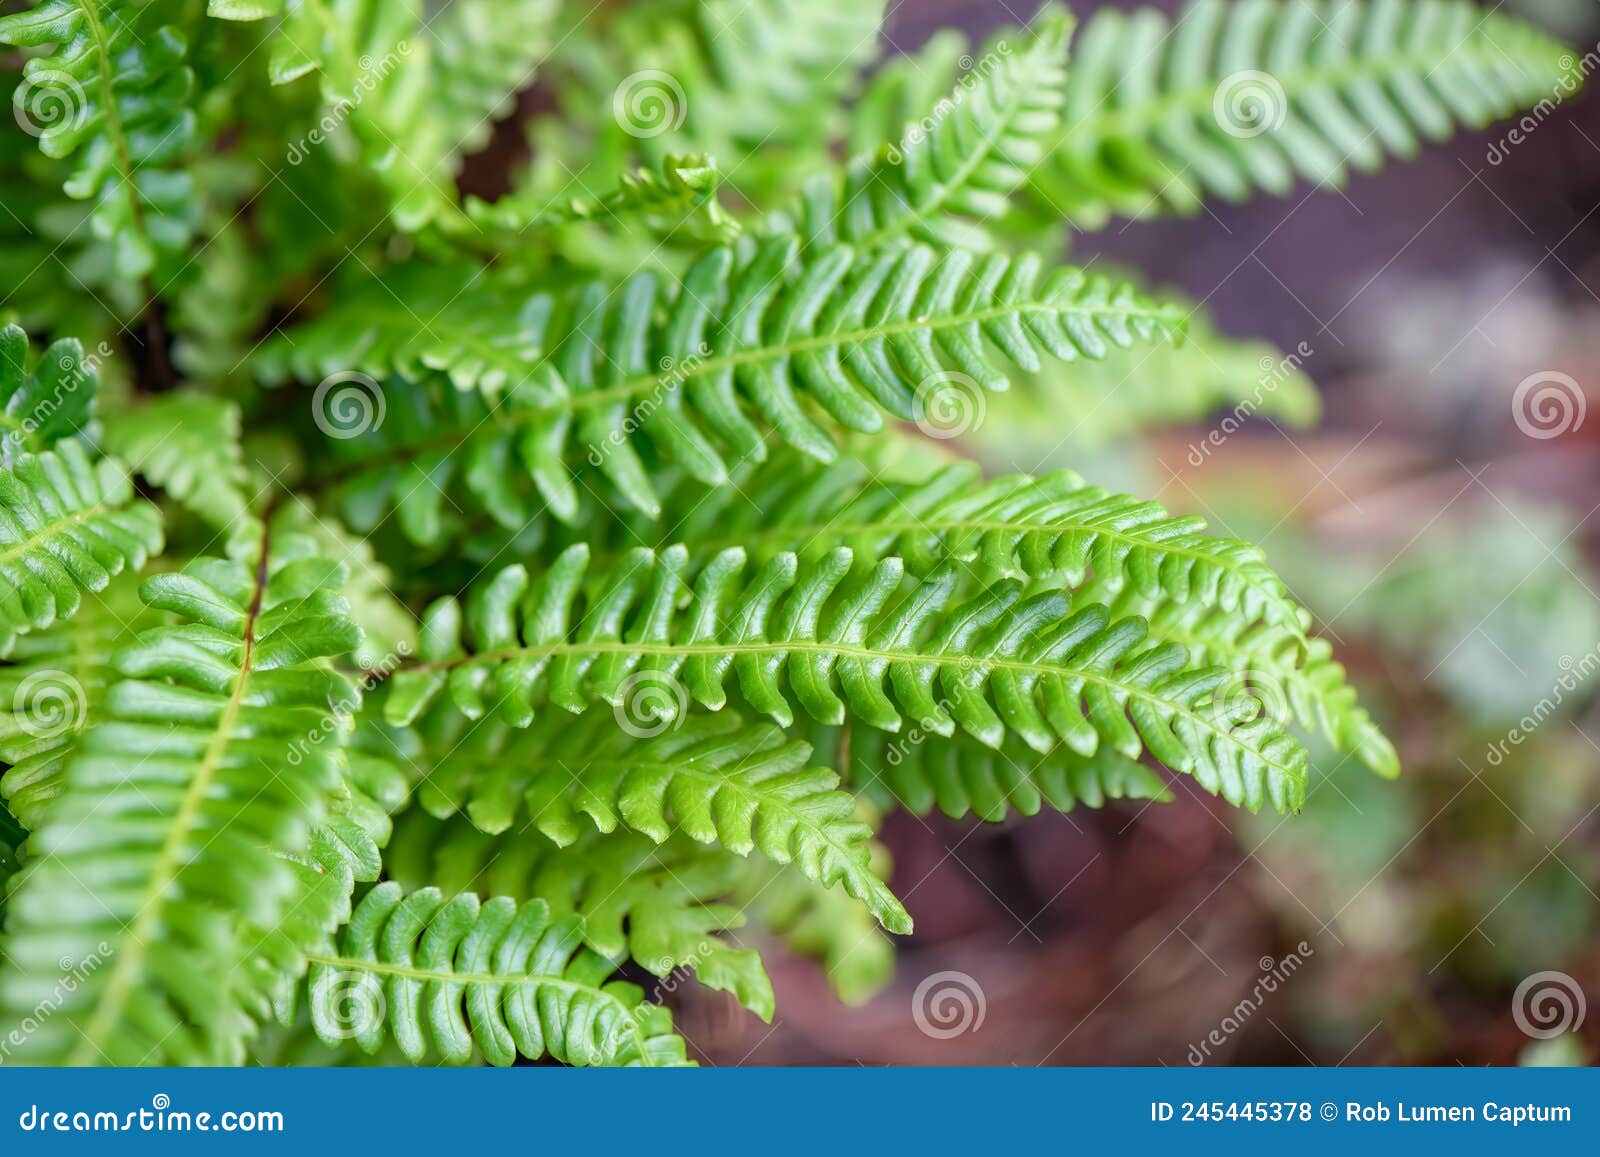 deer fern struthiopteris spicant, with green leaves